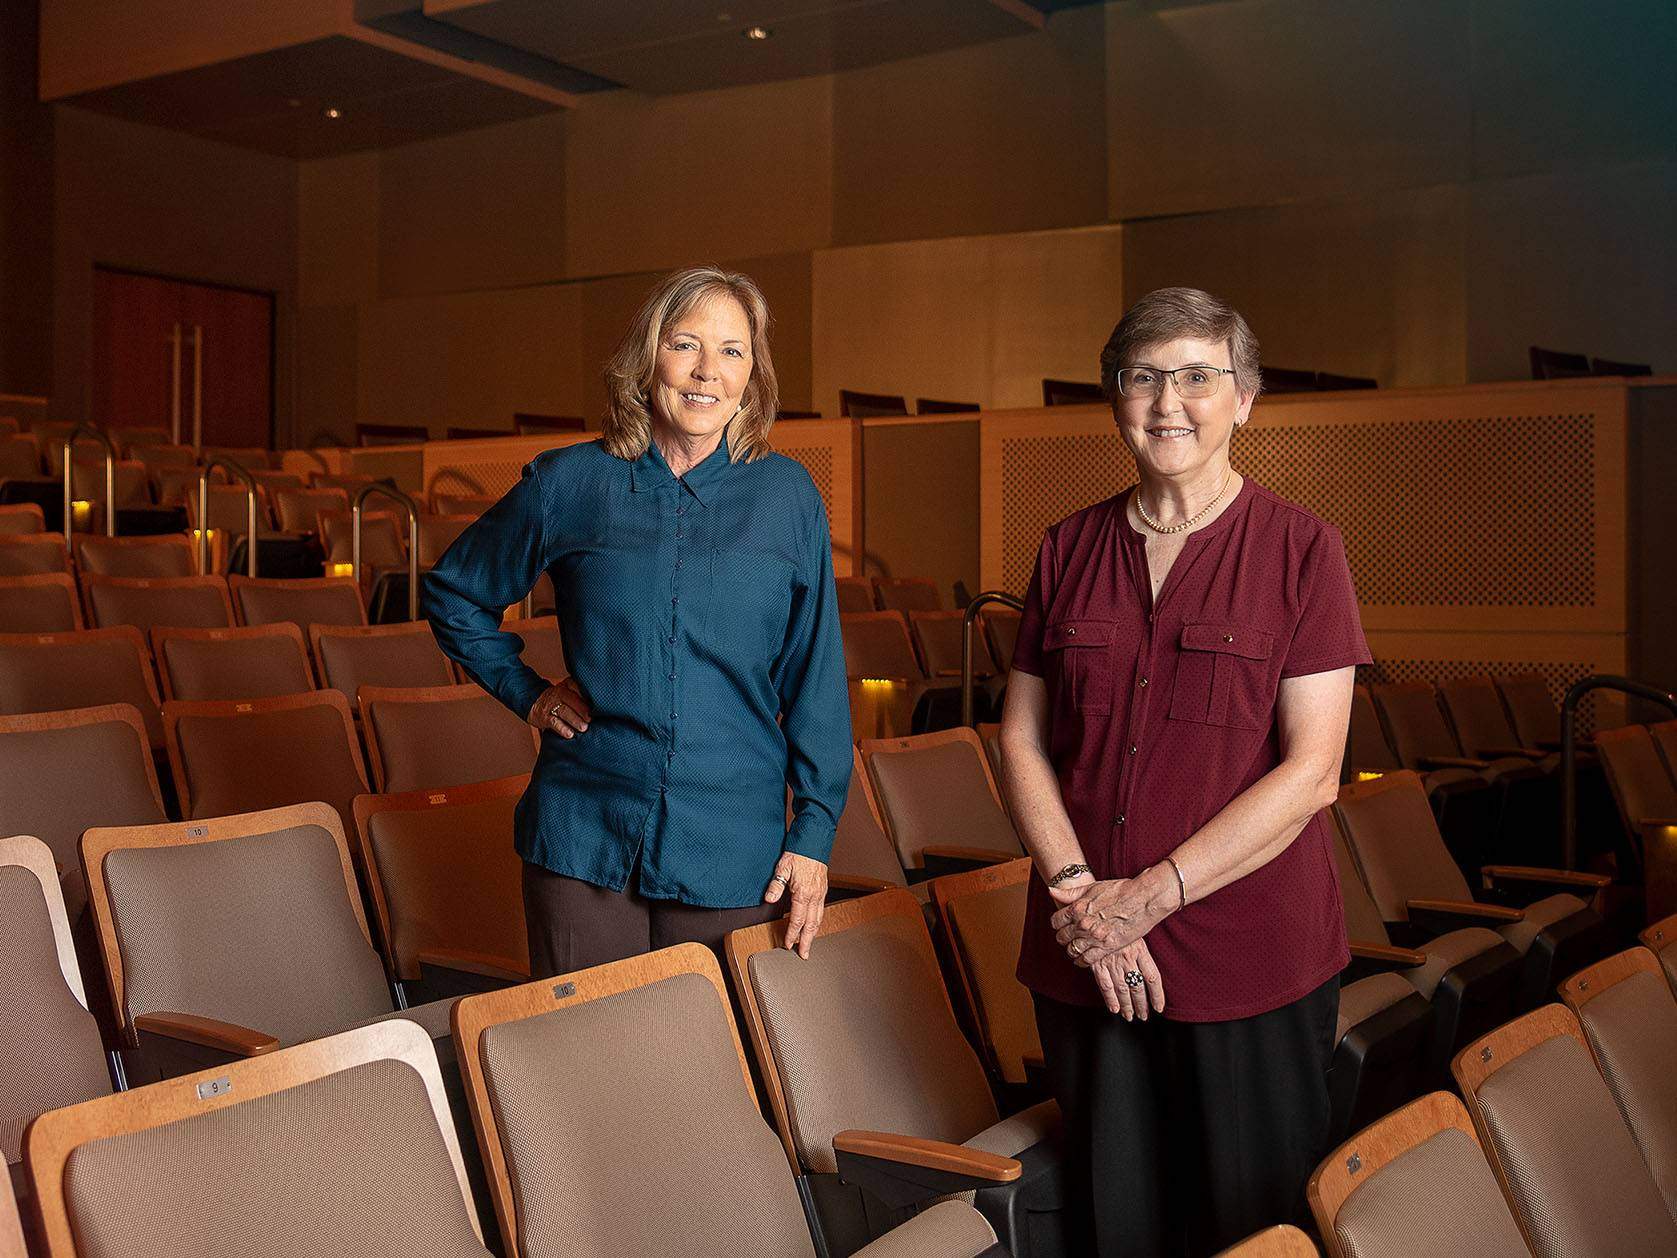 two women standing in theater and smiling